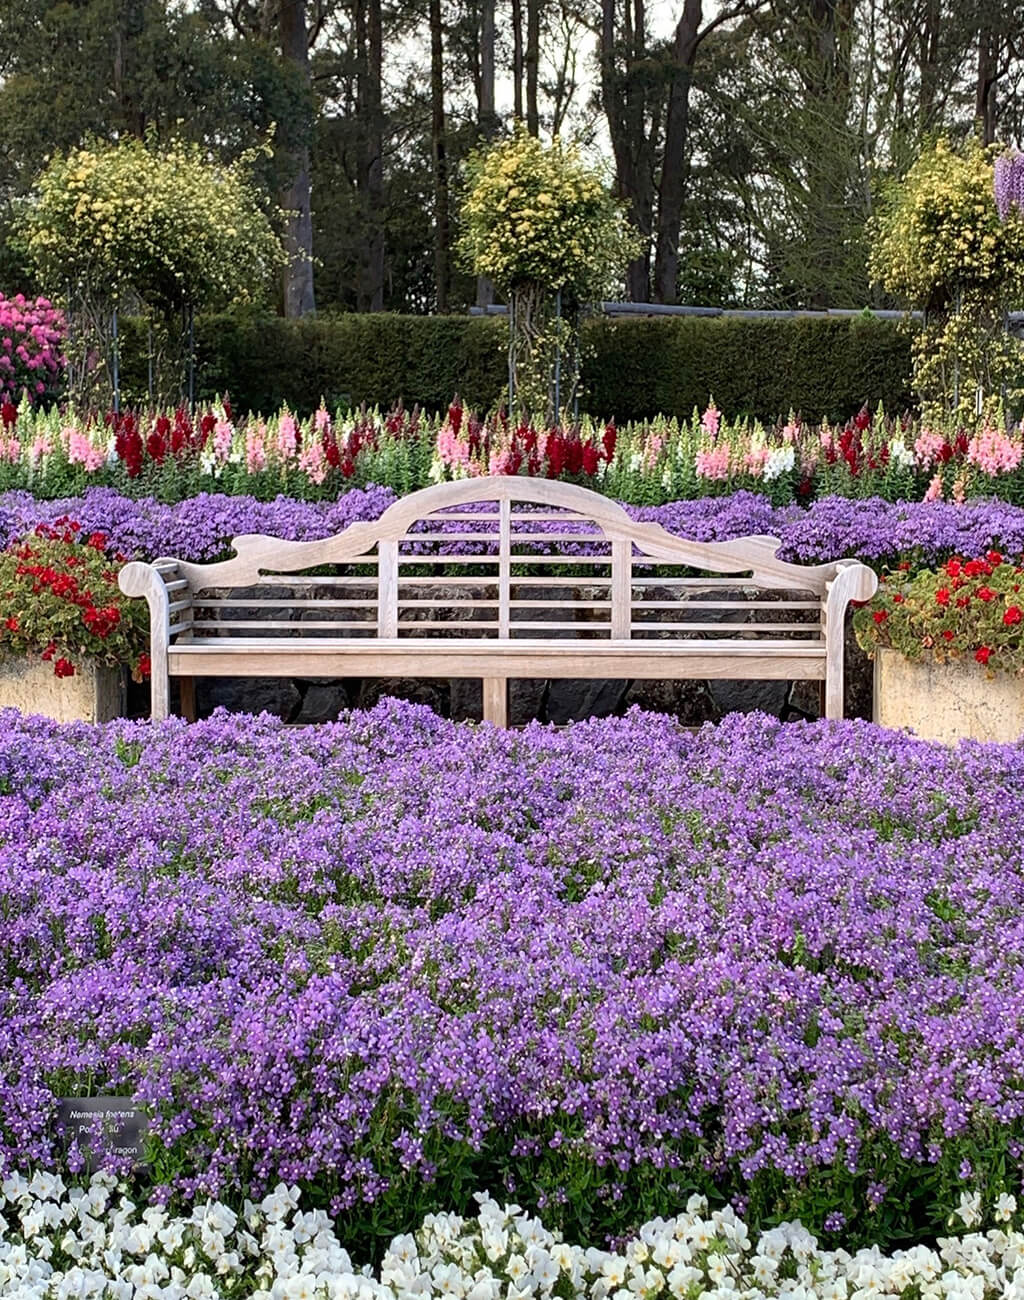 Garden bench surrounded by purple, white and red spring flowers